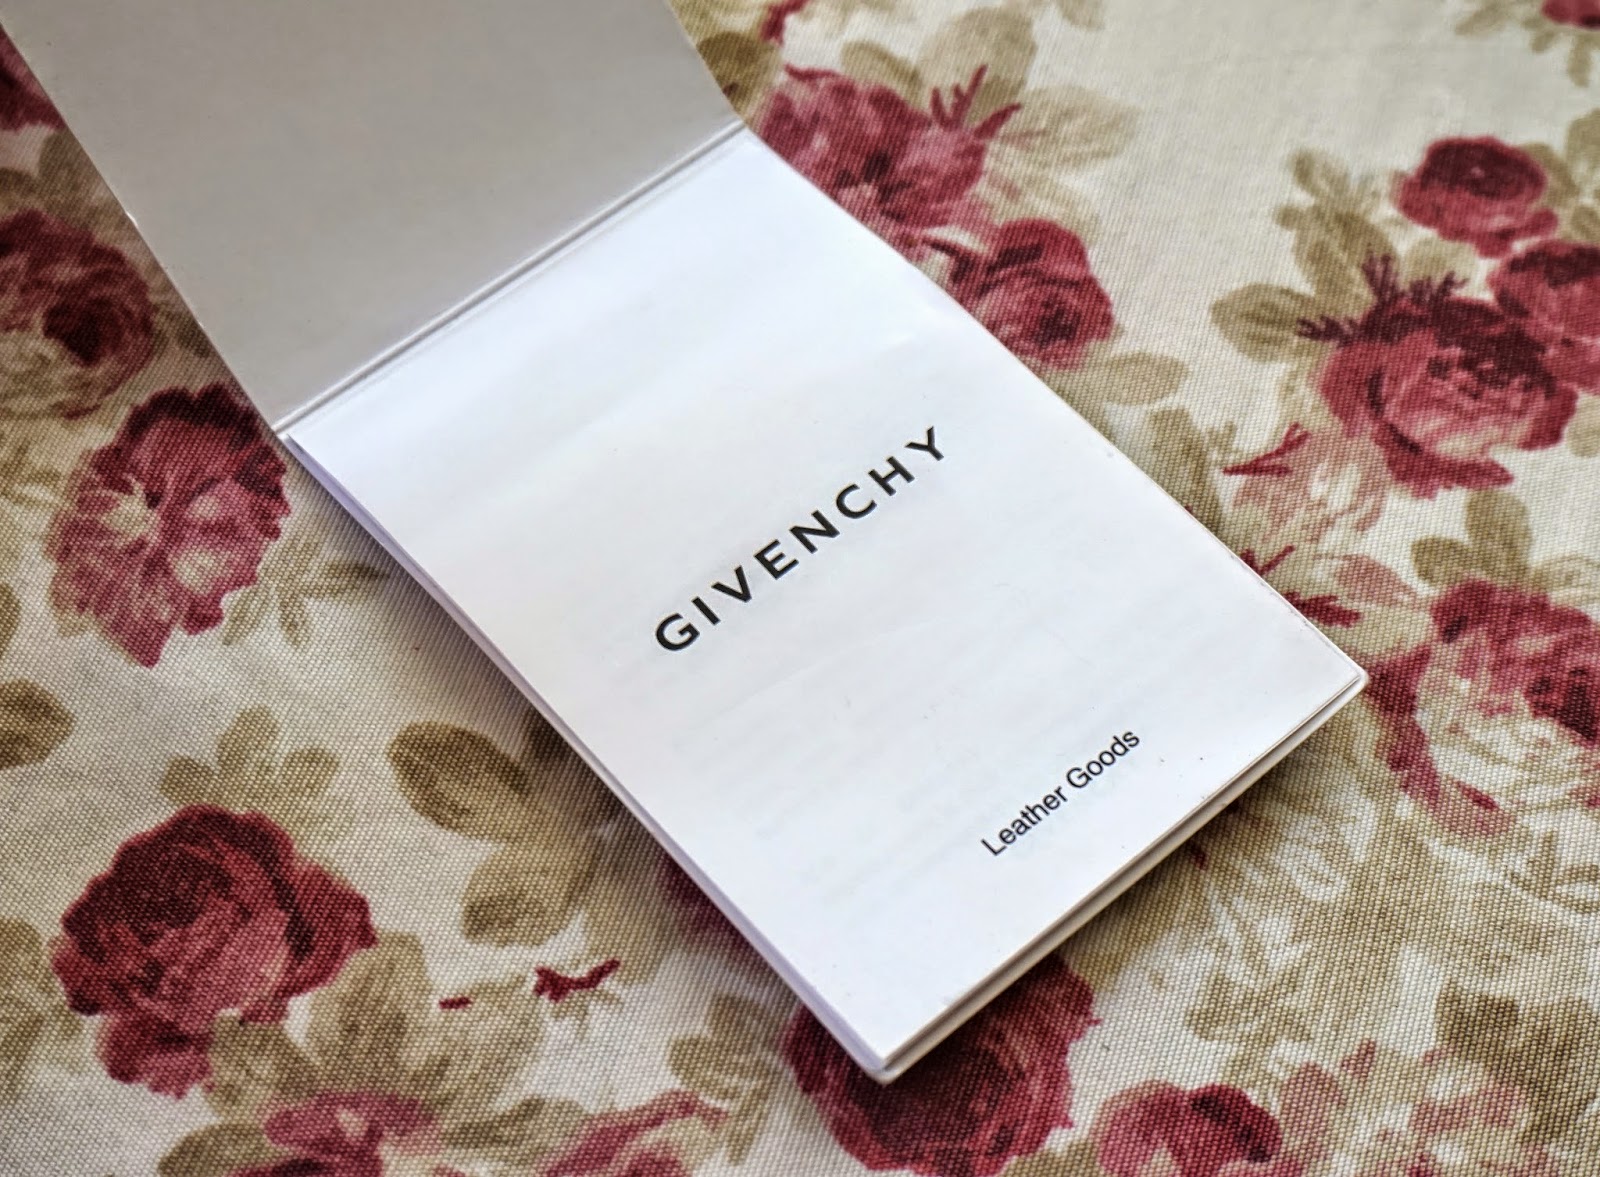 Givenchy Pandora Review and Buying Guide – Au Fait Finds